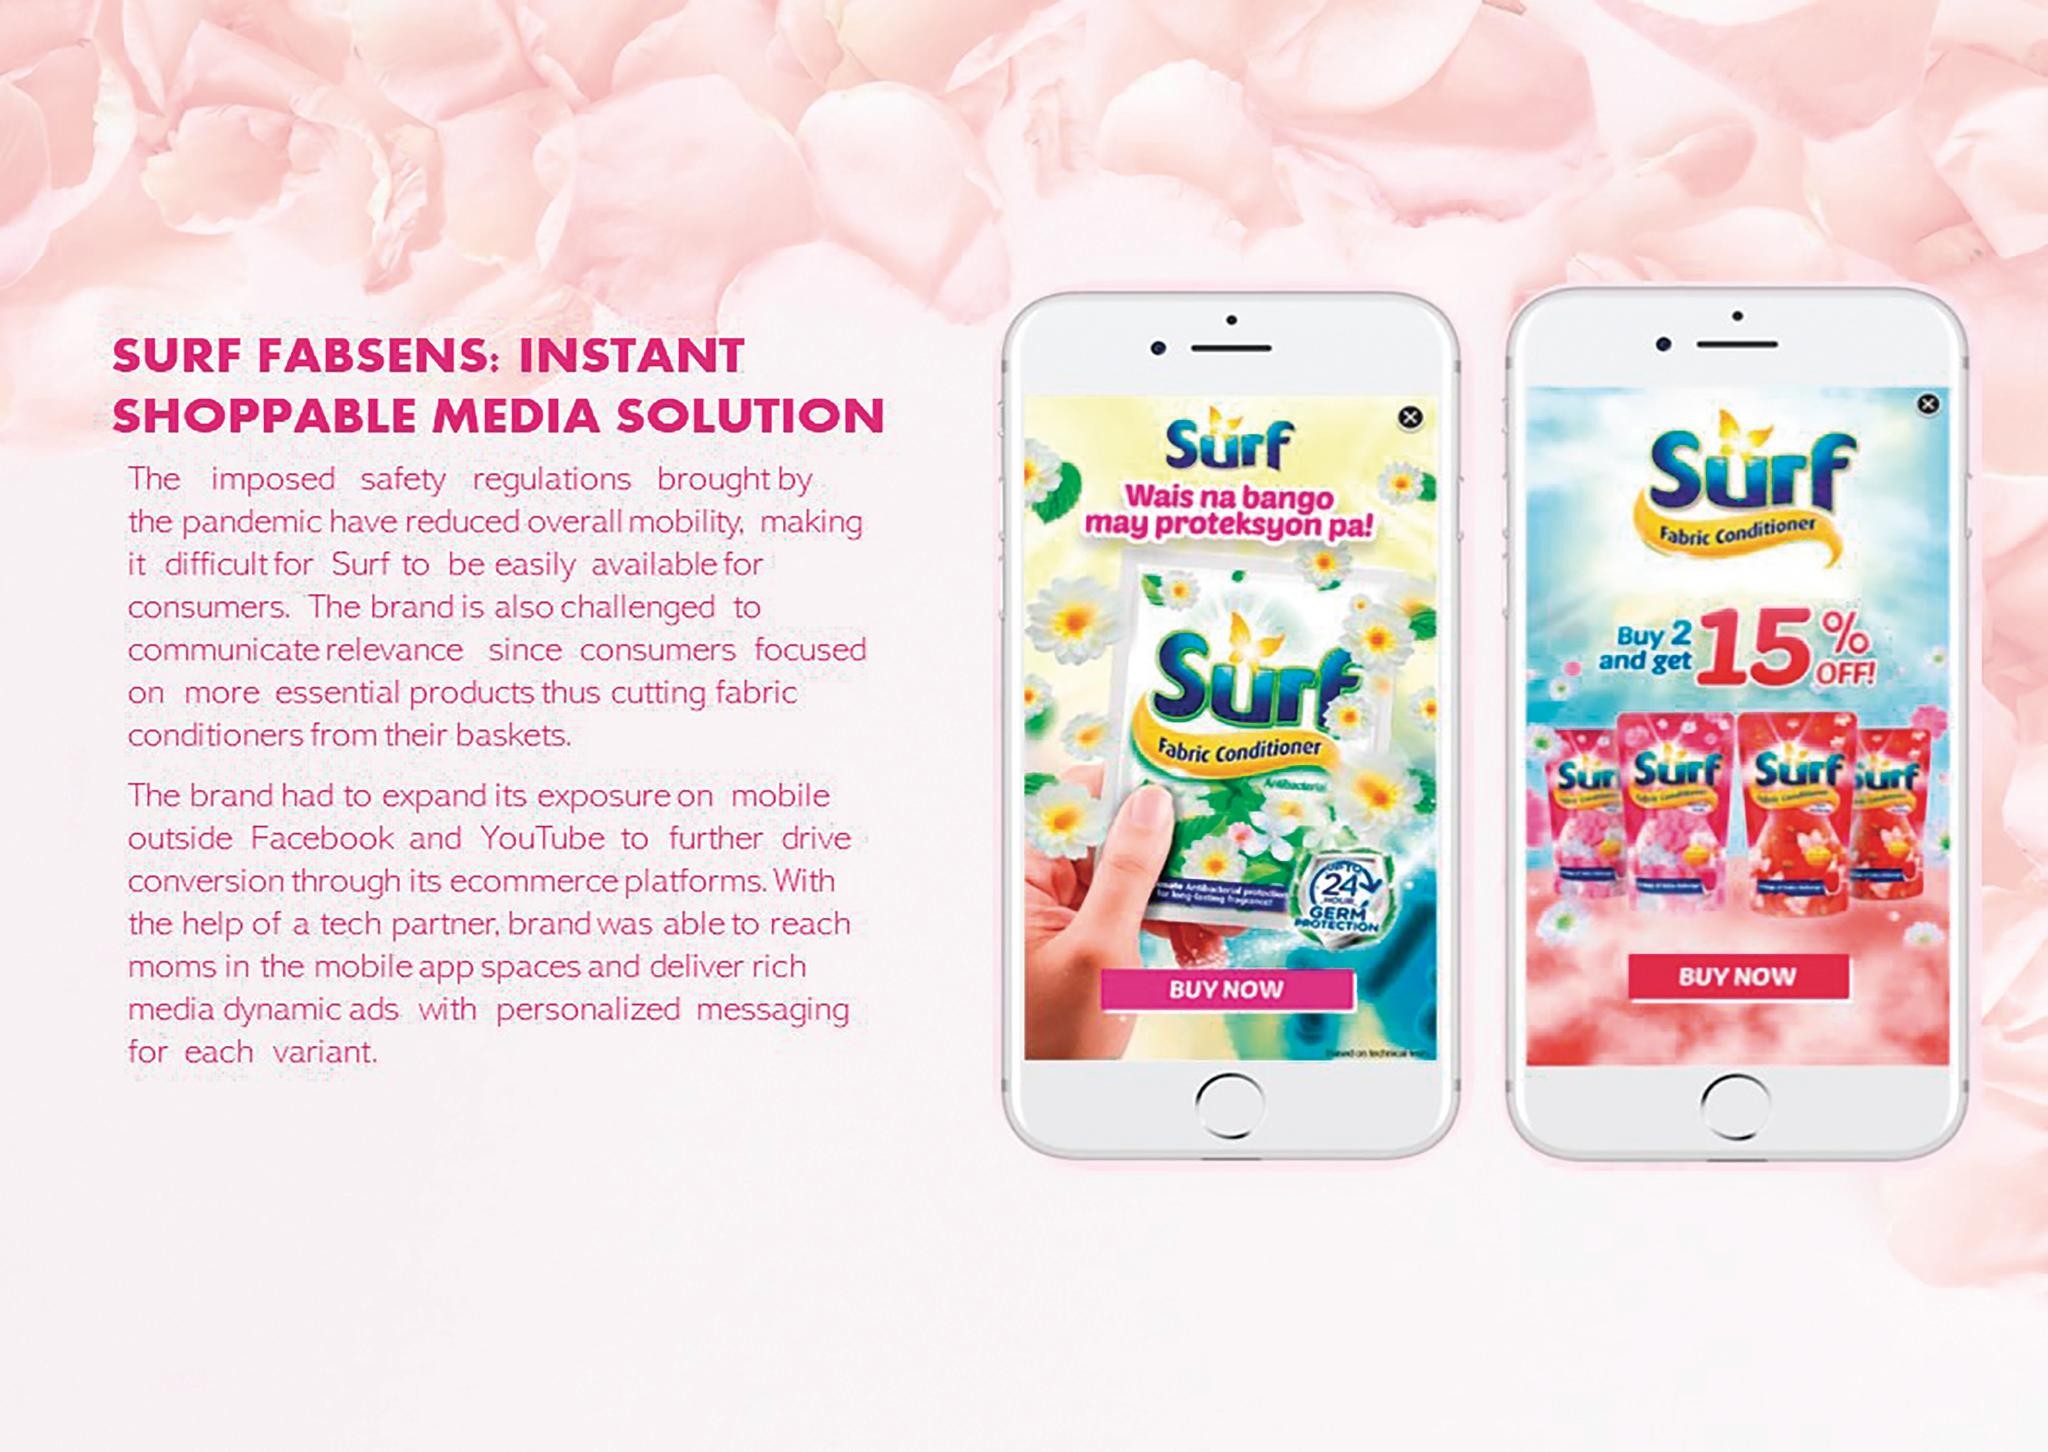 Surf Fabcon: Driving Conversions via Instant Shoppable Media